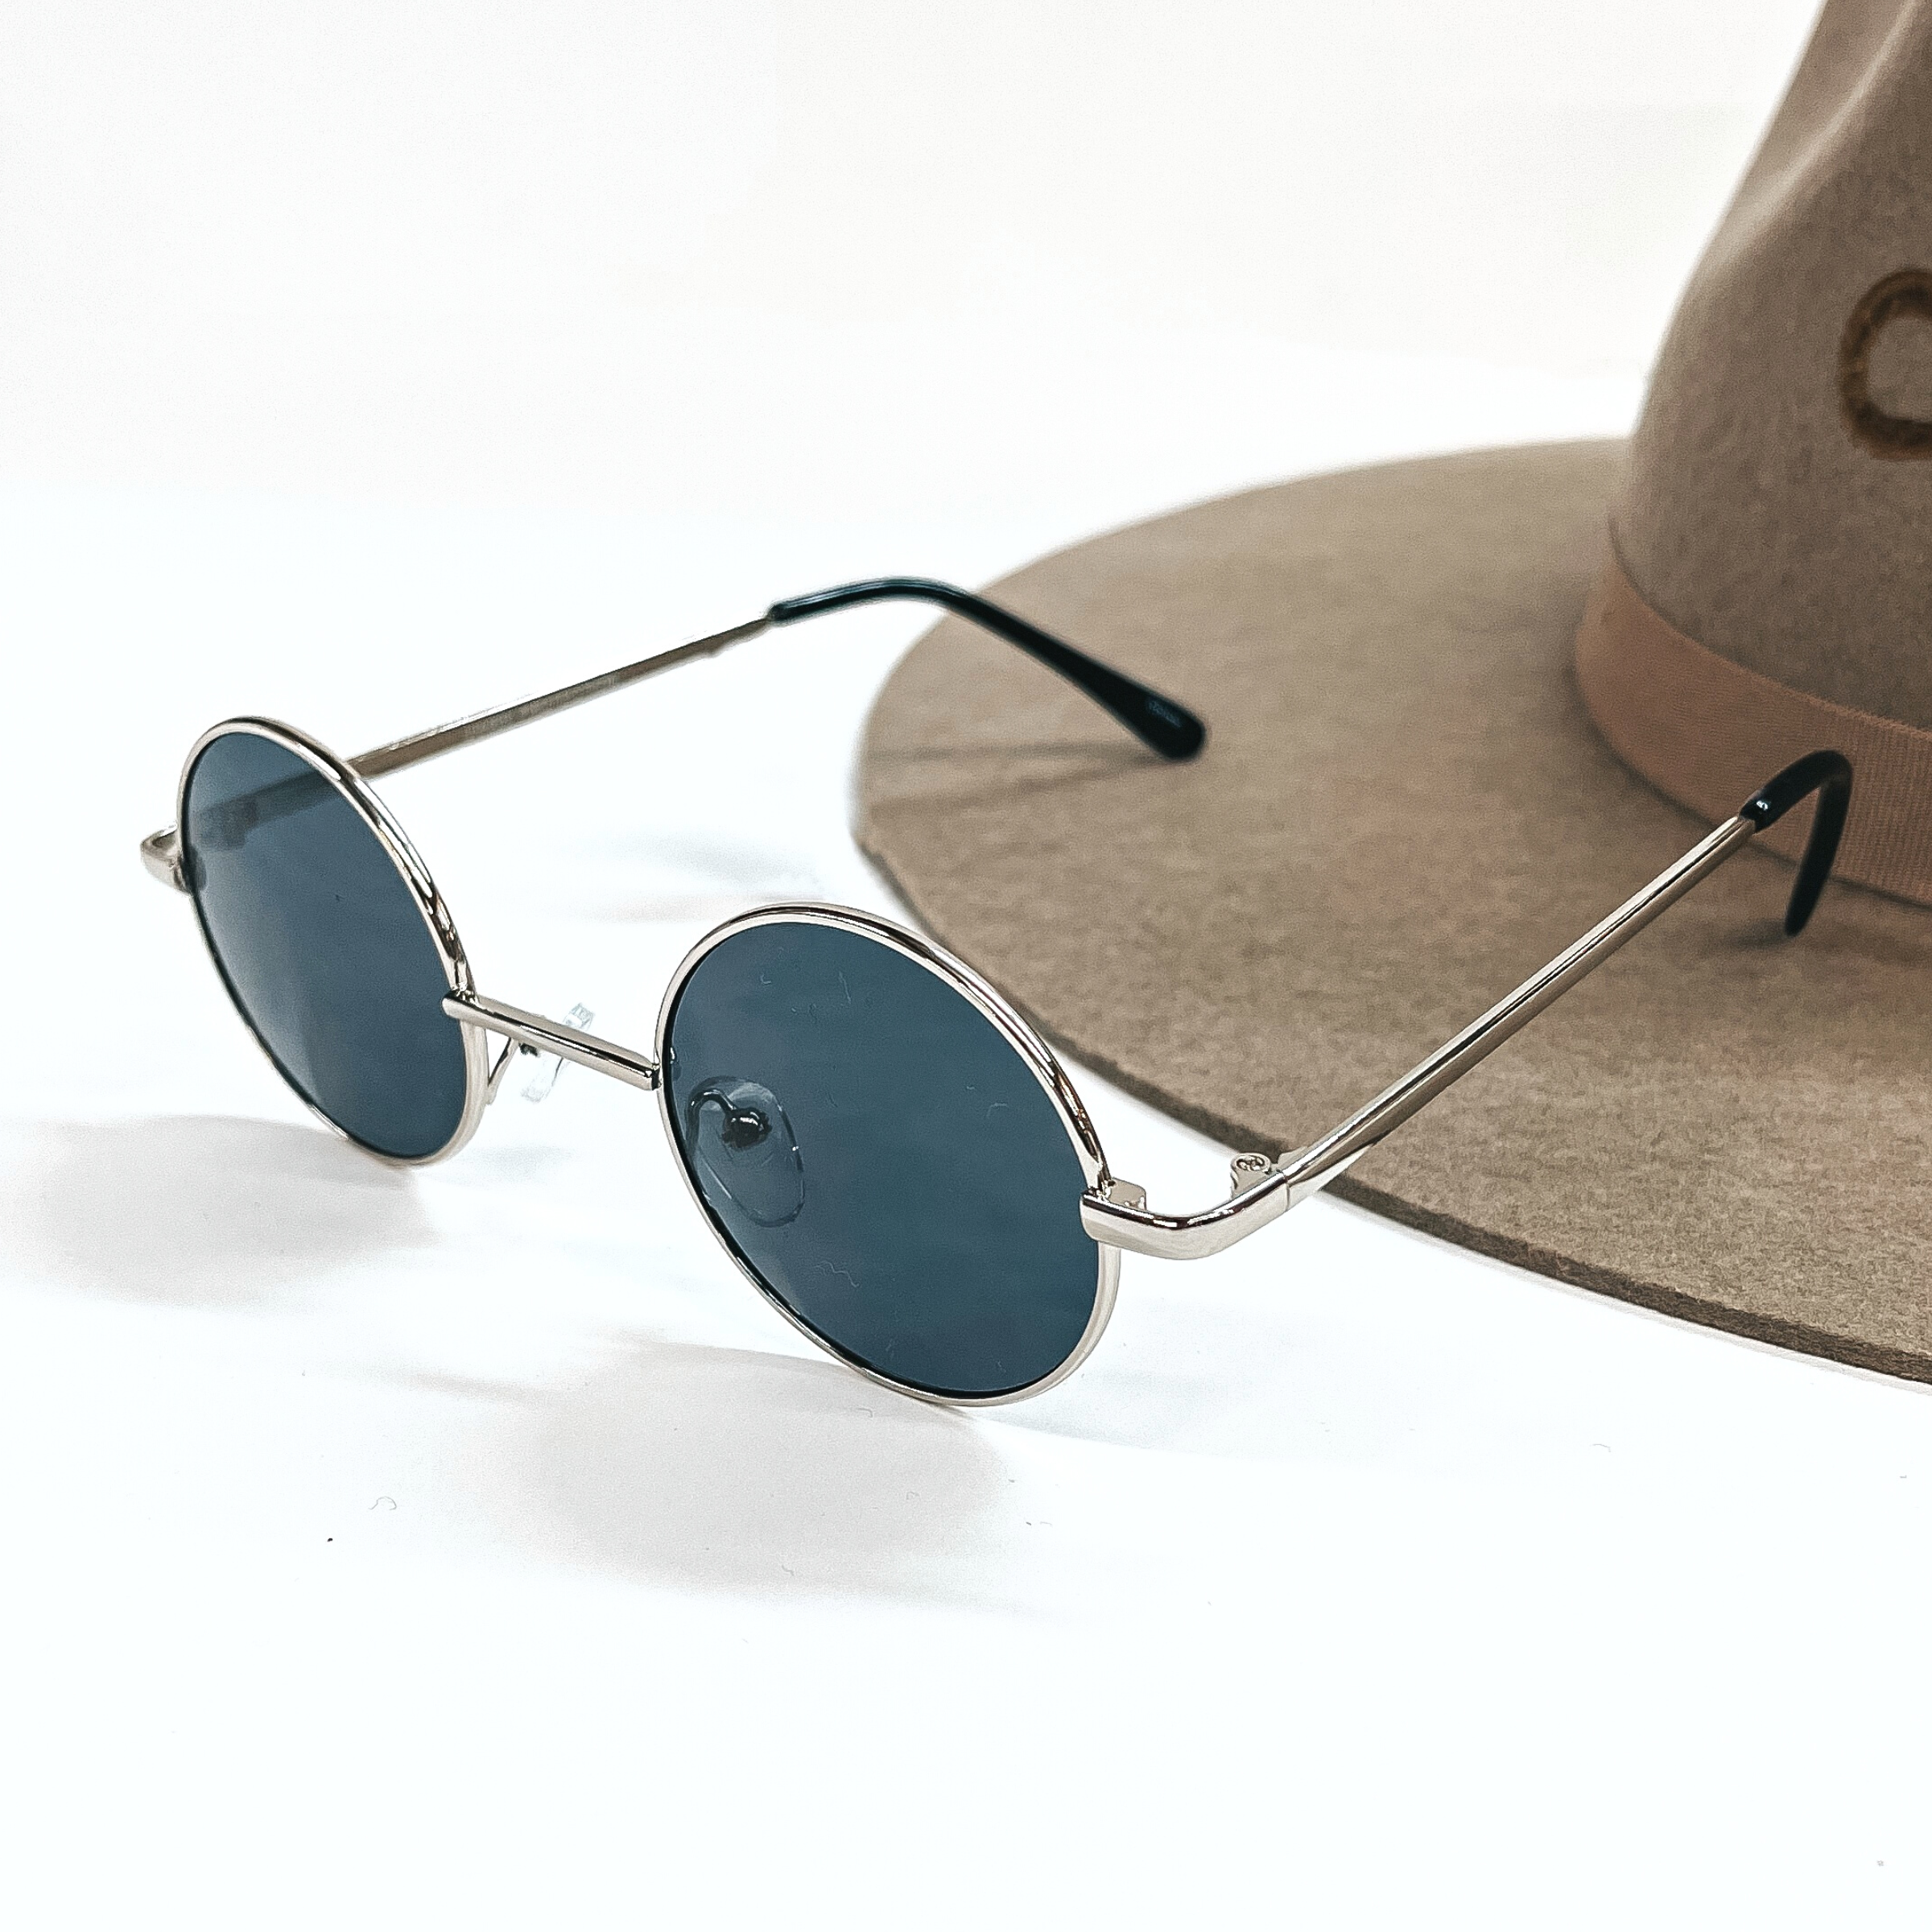 These are small circle sunglasses with dark grey lenses and a  silver outline/frame.  These sunglasses are taken on a a white background and on a brown  felt hat brim.